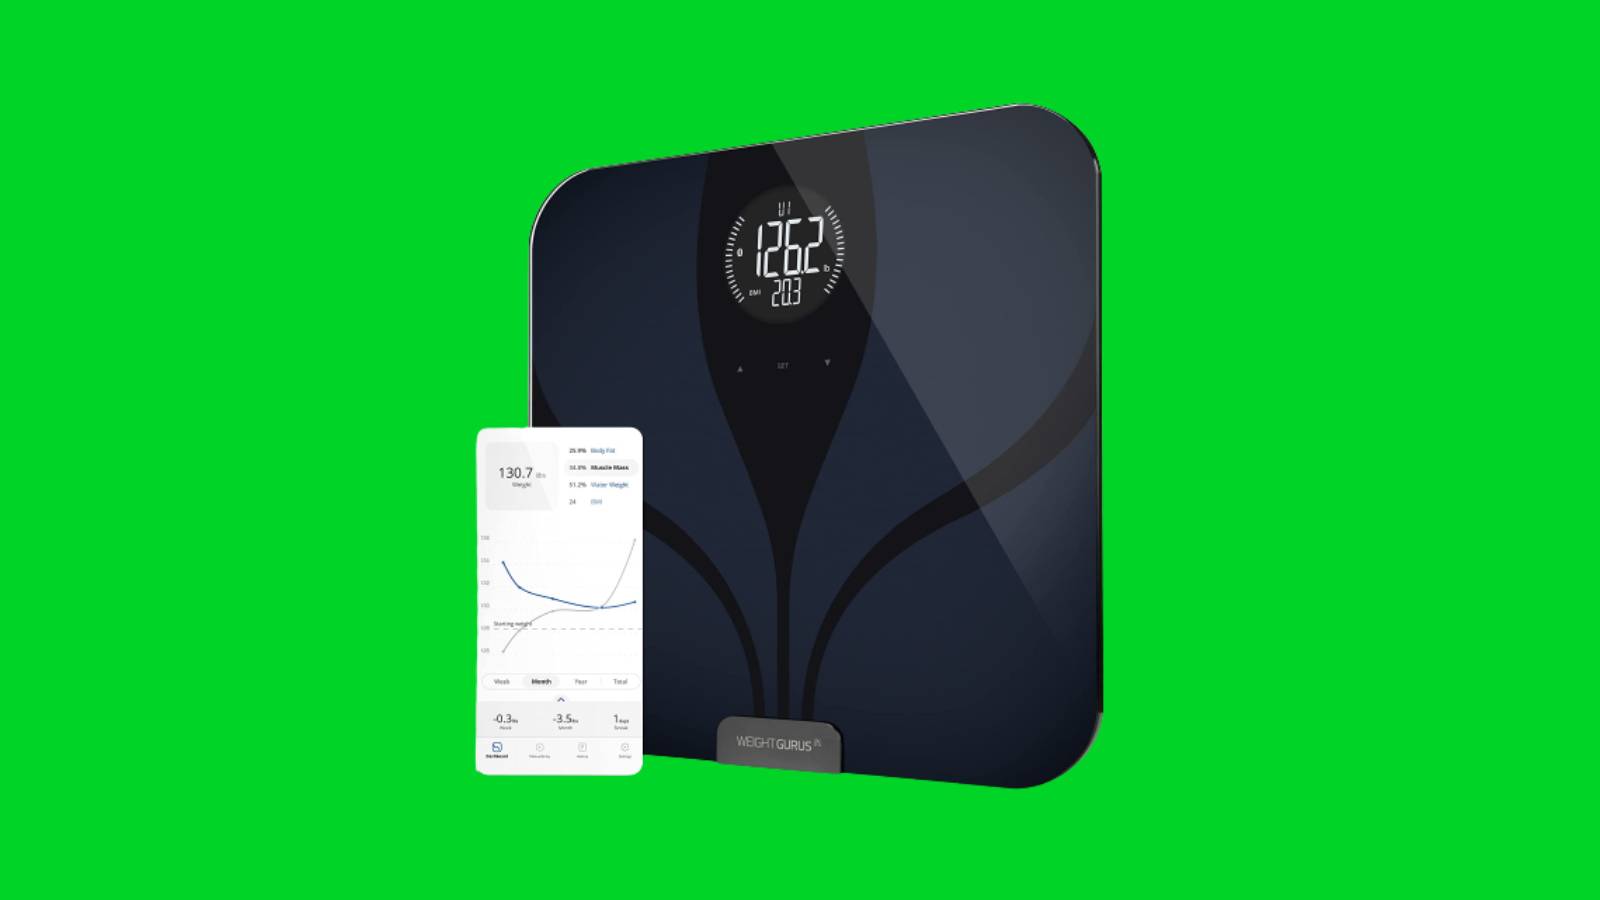 Wyze Smart Scale, Body Fat Digital WiFi Scale and Body Weight Composition  BMI Smart Scale, Heart Rate Monitor Tracker, Wireless Body Fat Percentage